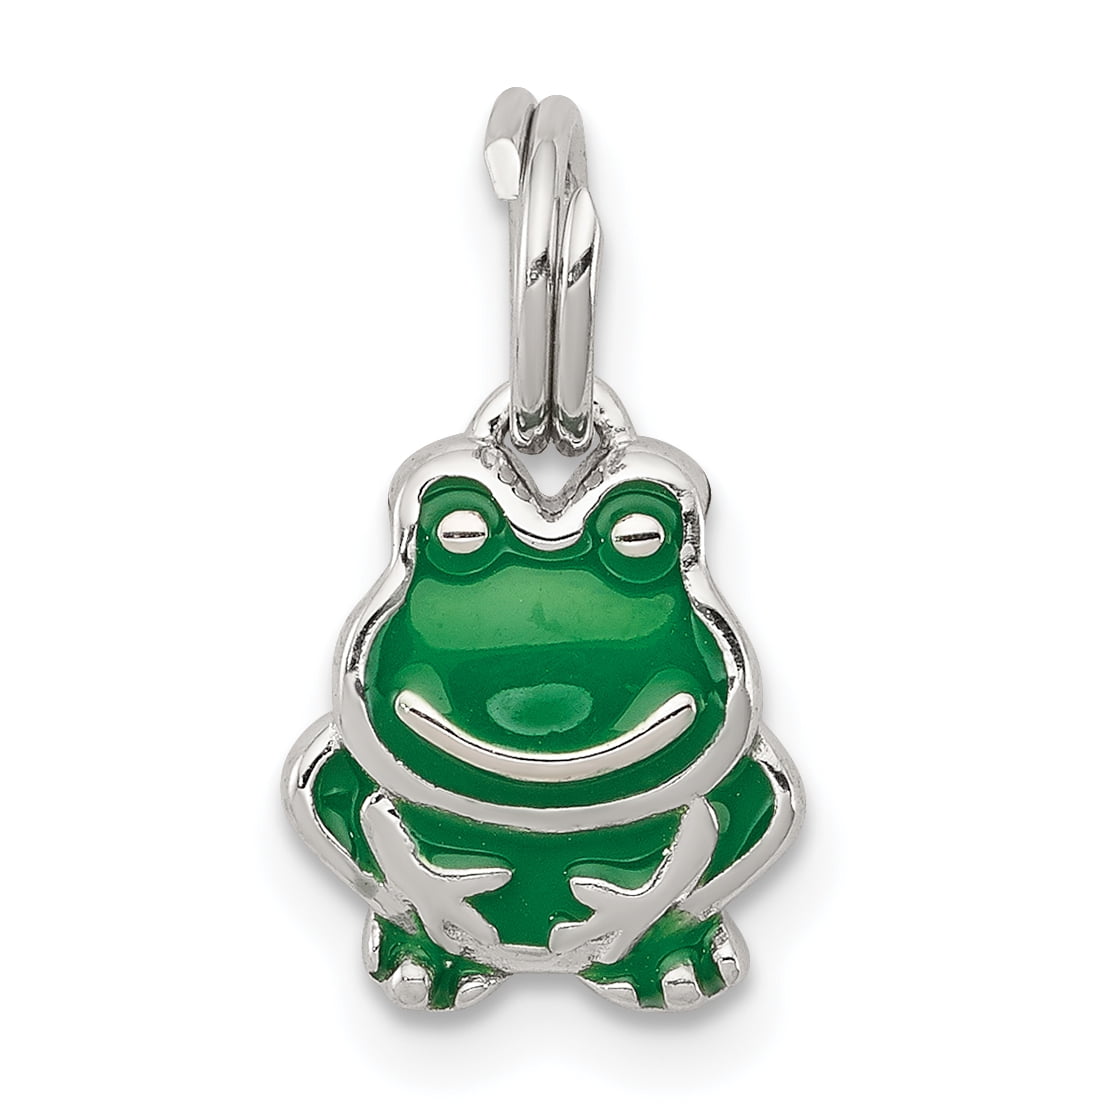 US Jewels And Gems Solid 0.925 Sterling Silver Frog Charm Pendant Box Chain Necklace